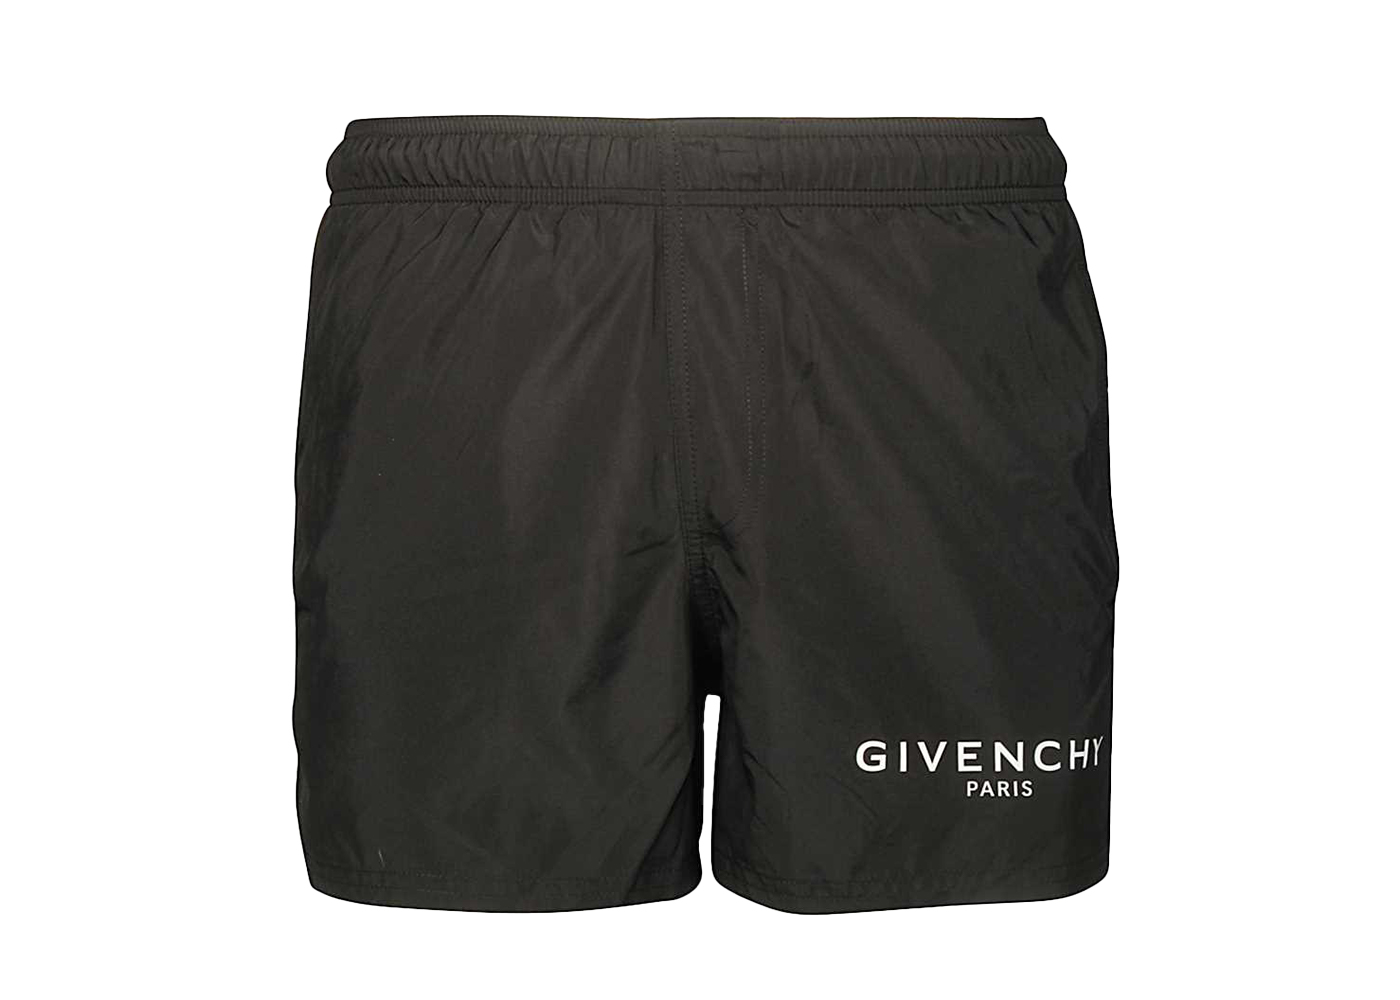 Buy Other Brands Givenchy Streetwear - StockX